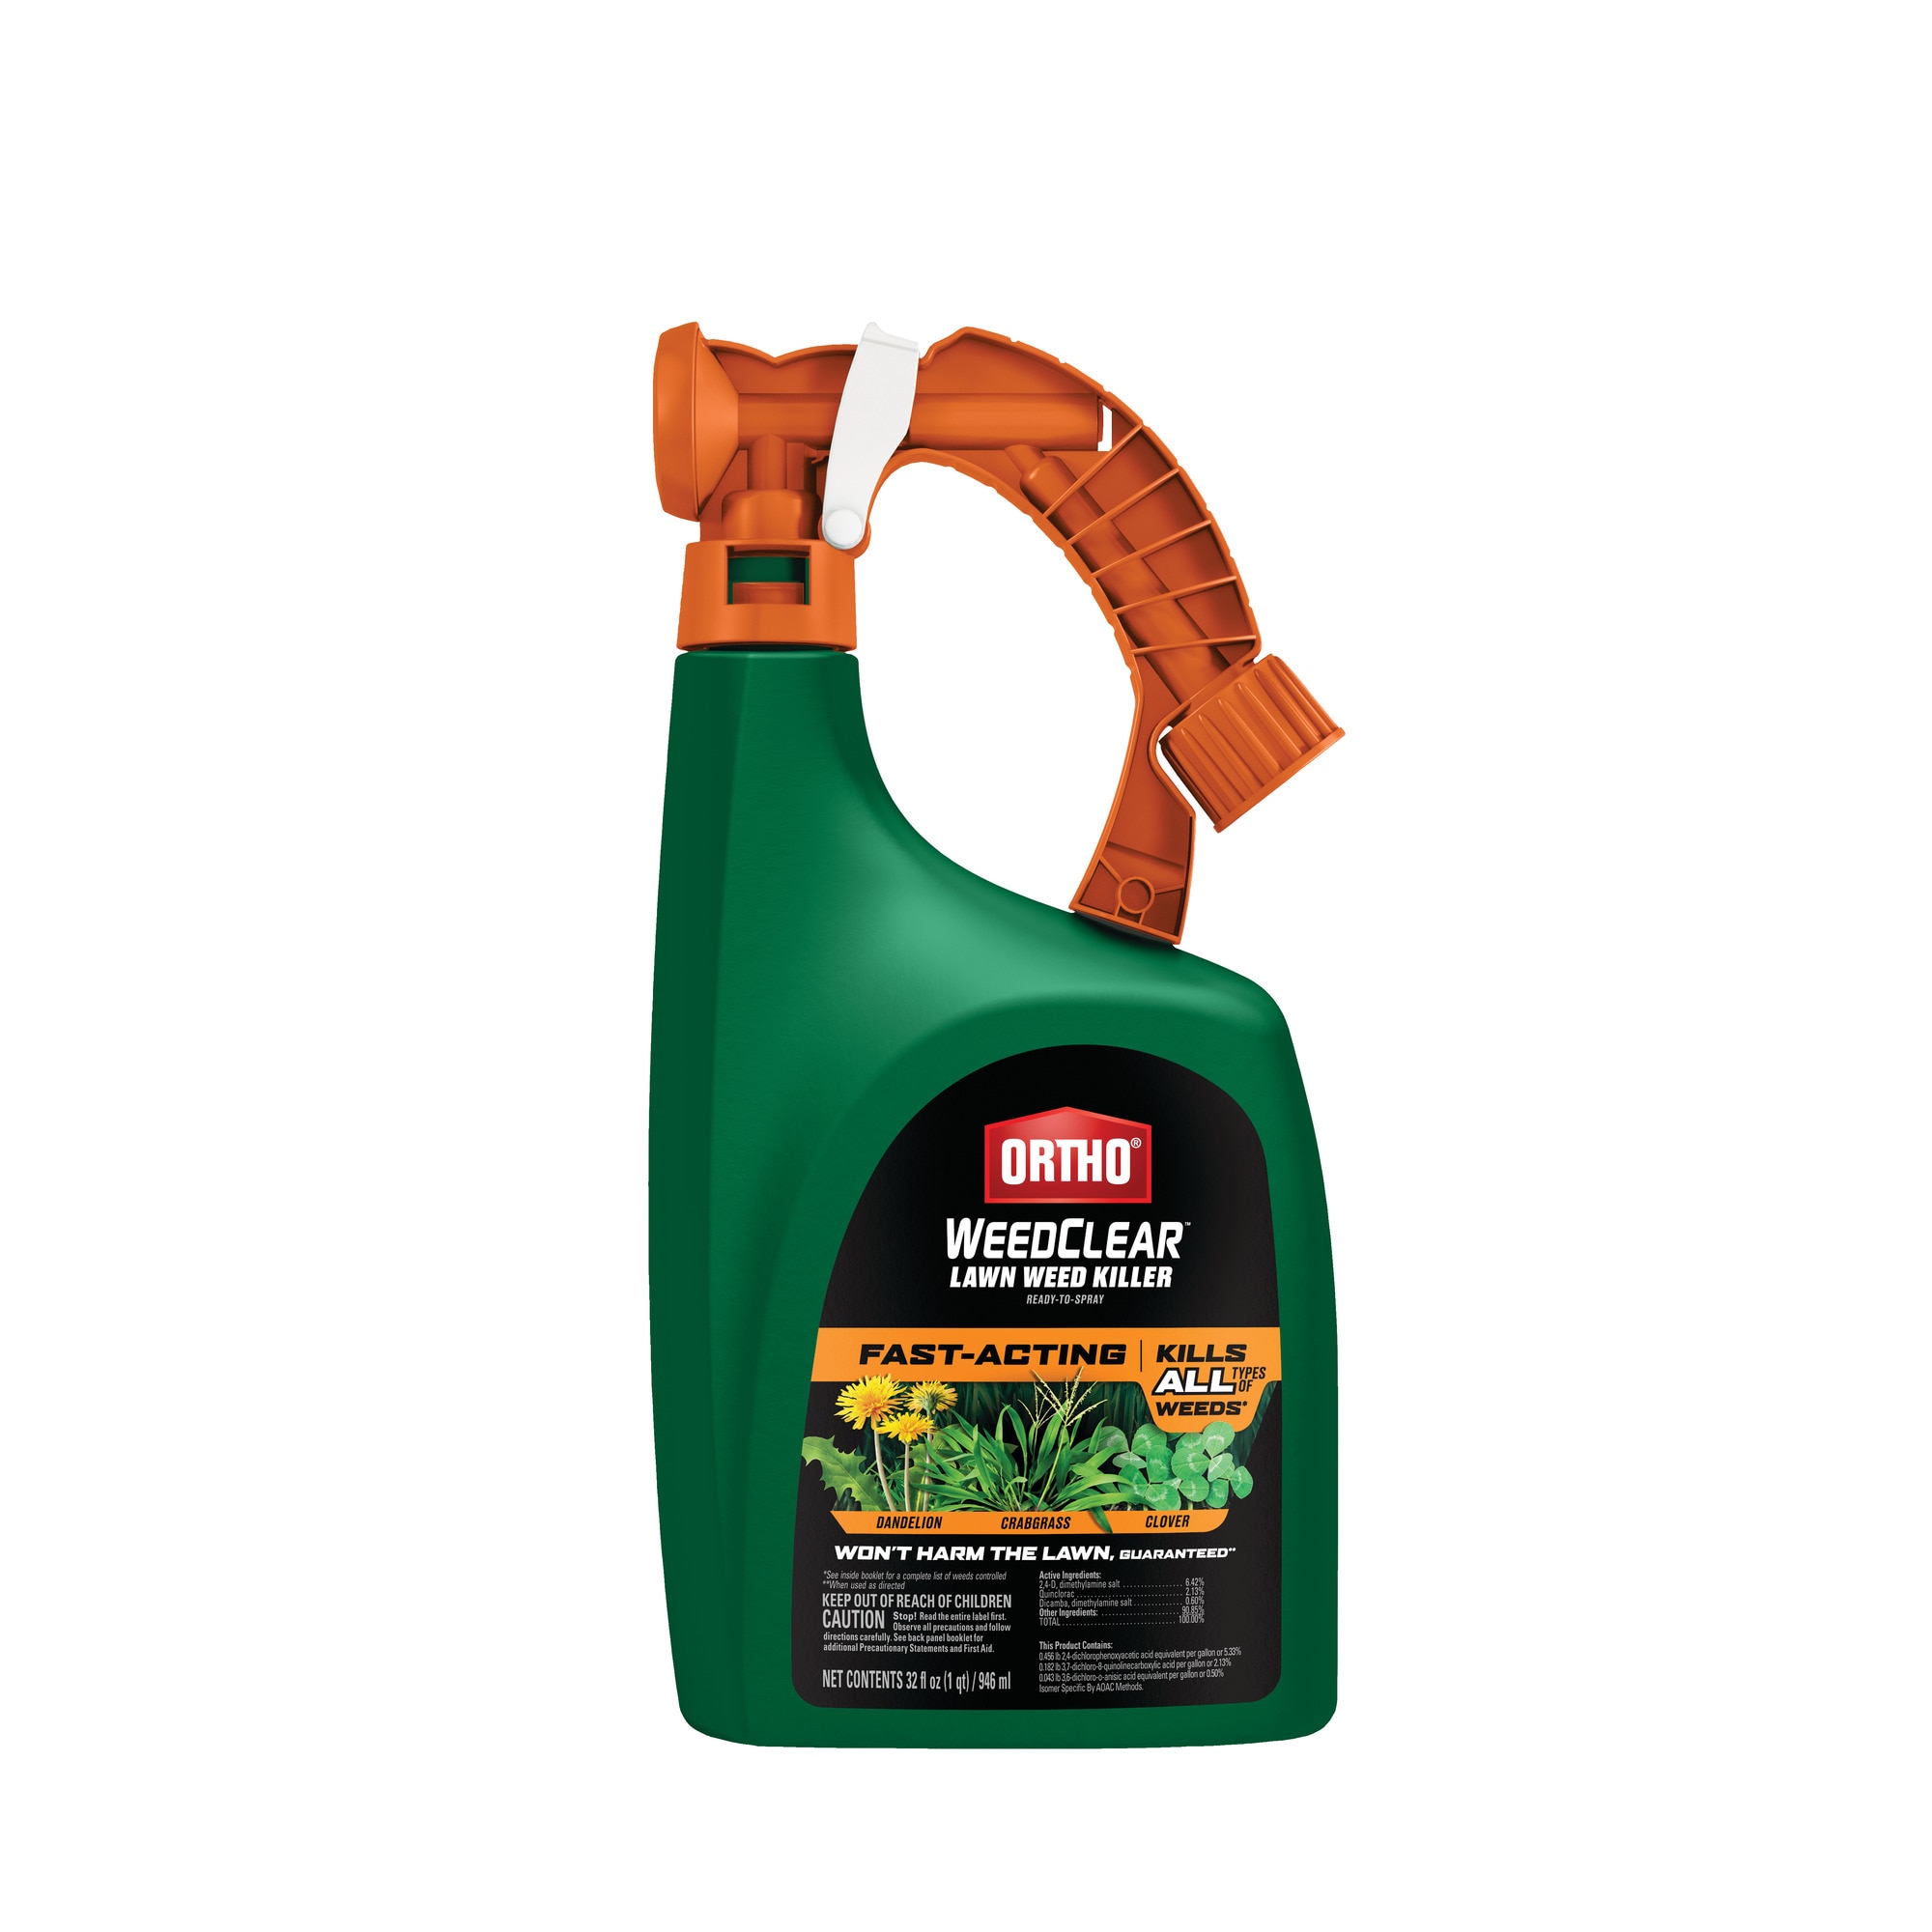 Sprayers first use. Thank goodness not spraying anything lethal. :  r/harborfreight